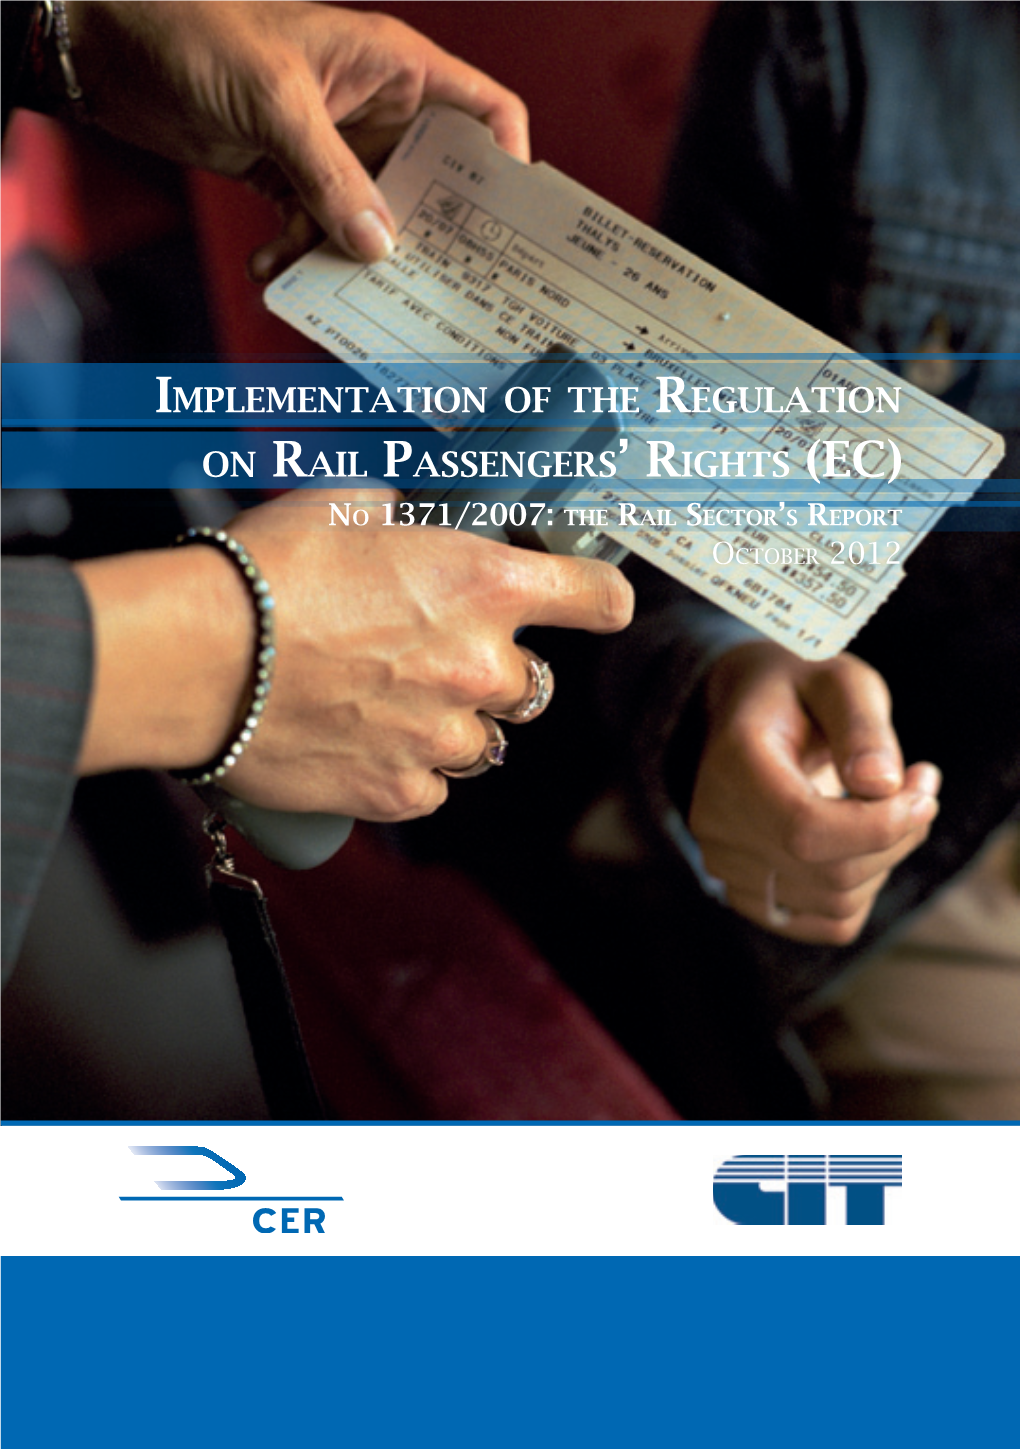 Implementation of the Regulation on Rail Passengers' Rights (Ec)